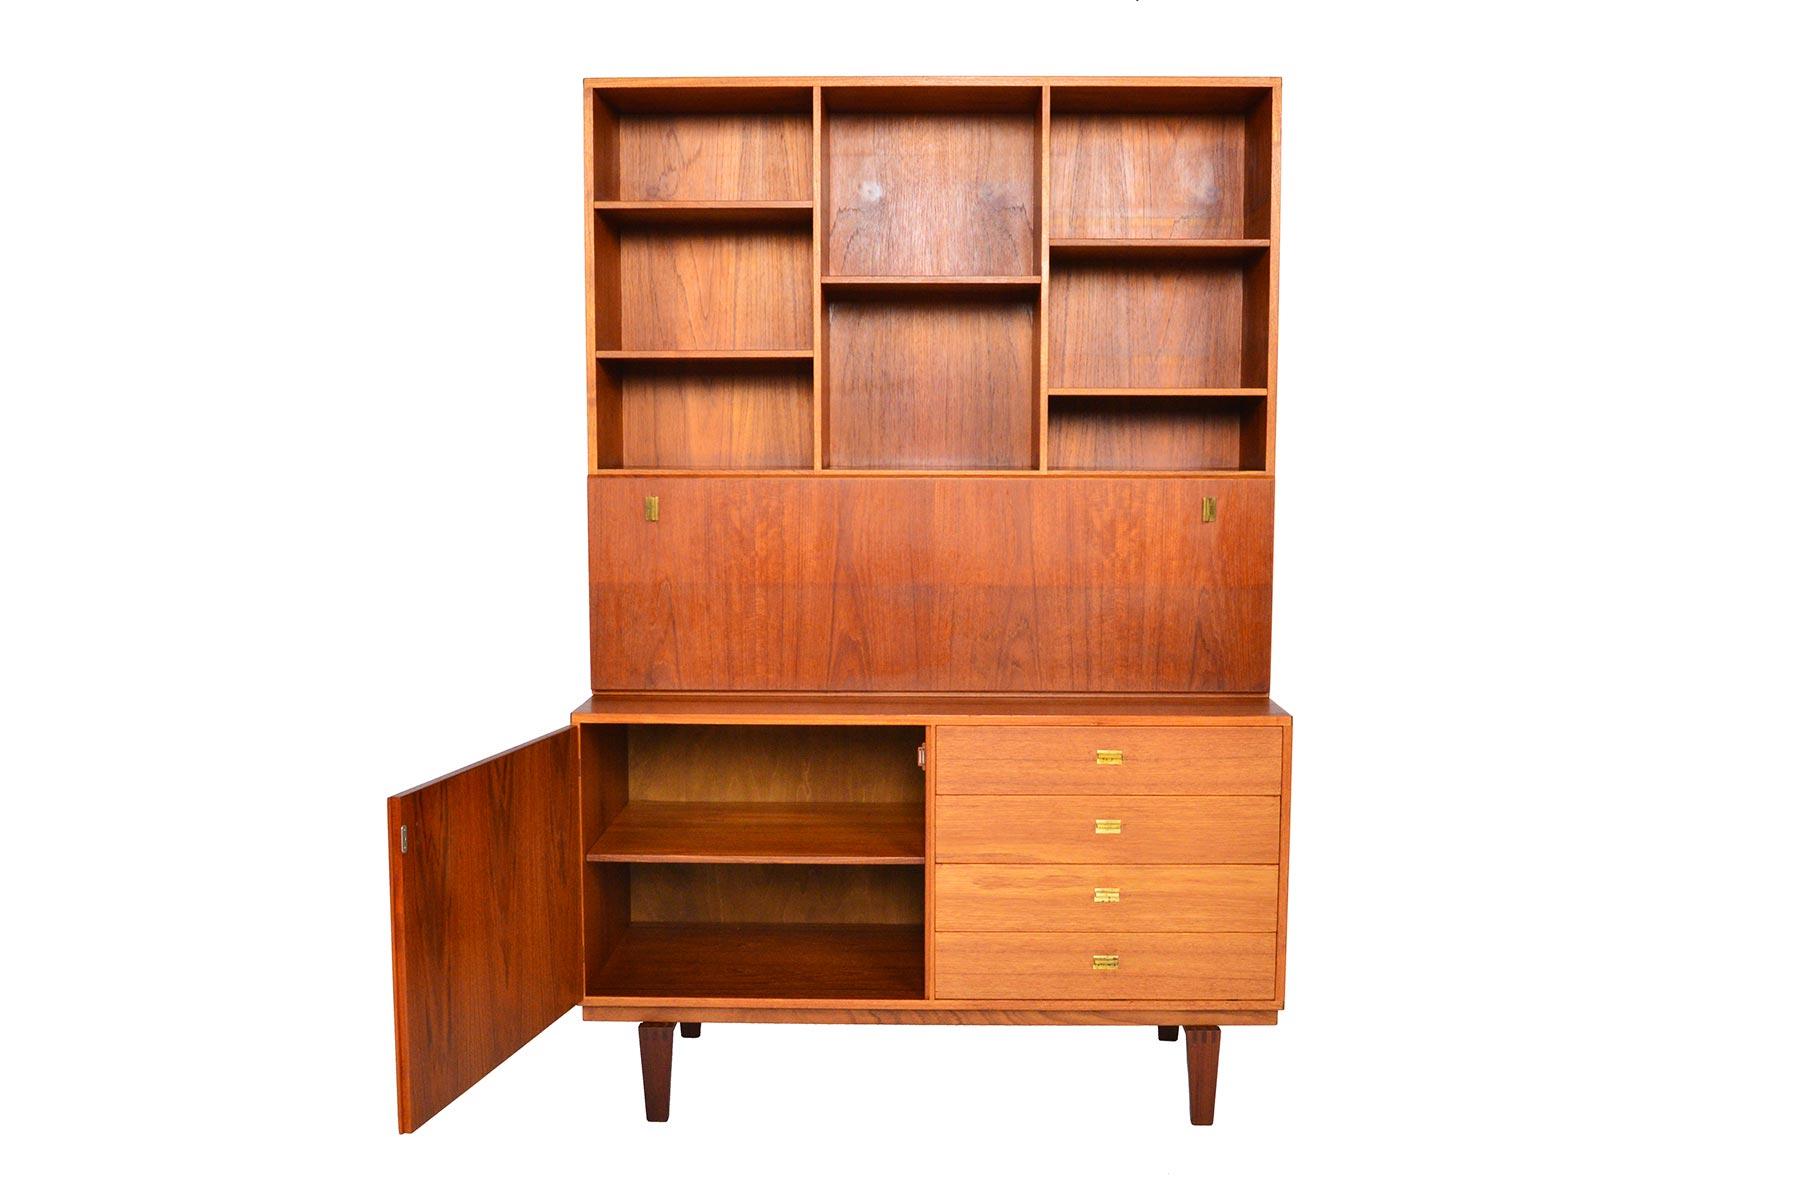 This lovely Danish modern teak credenza with hutch by Peter Løvig Nielsen offers a simple sleek design with beautifully patinated original brass hardware. The tall bookcase hutch features a drop down desk surface with three bays and five adjustable